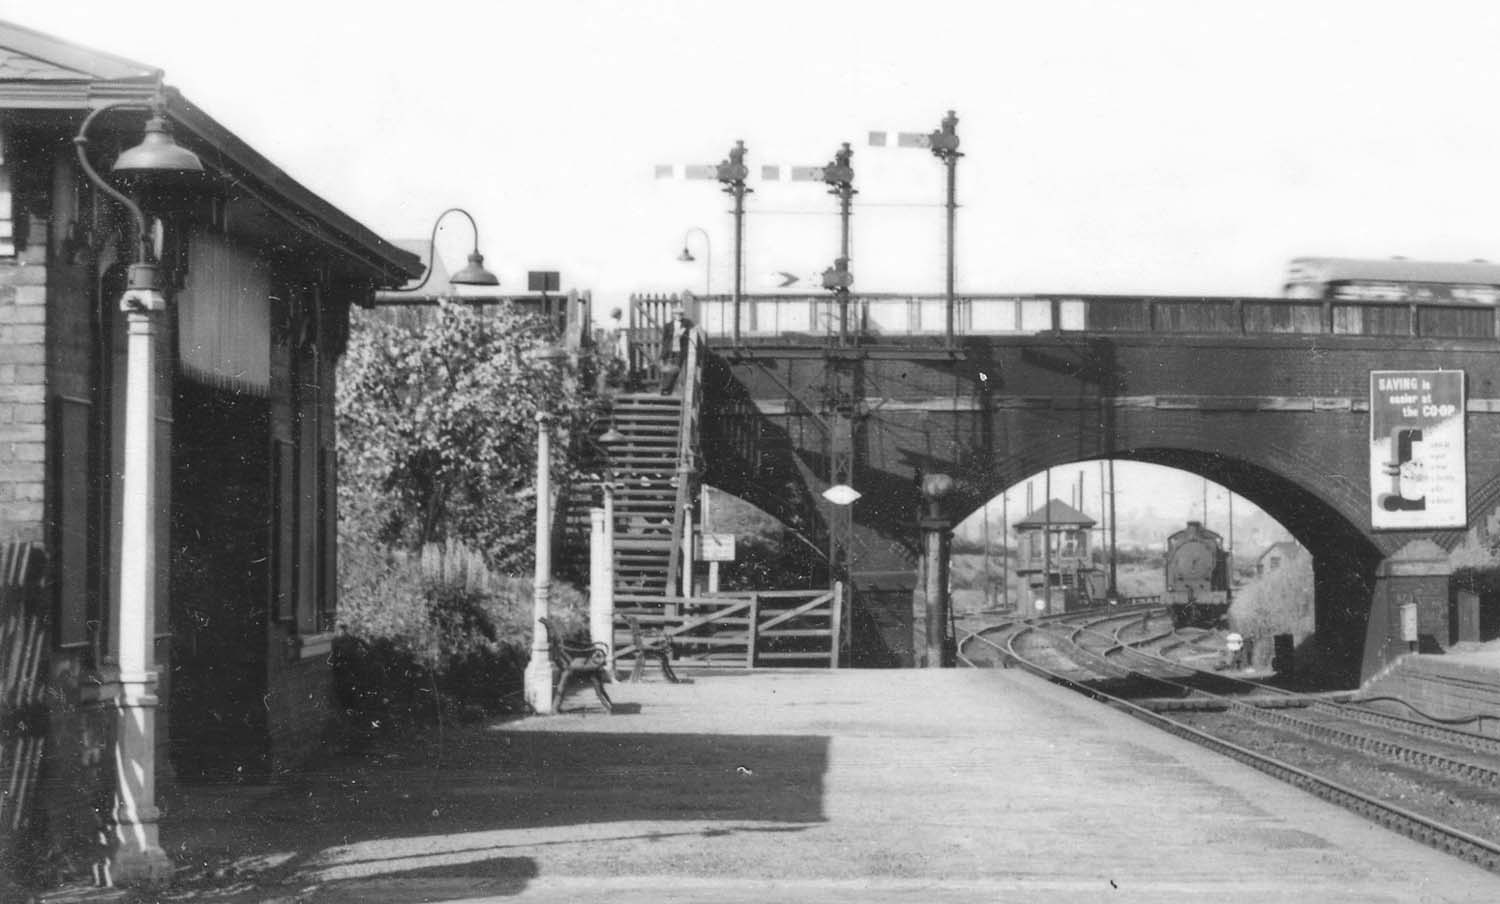 Nuneaton Abbey Street Station Looking Through The Over Bridge Carrying The Midland Road Over